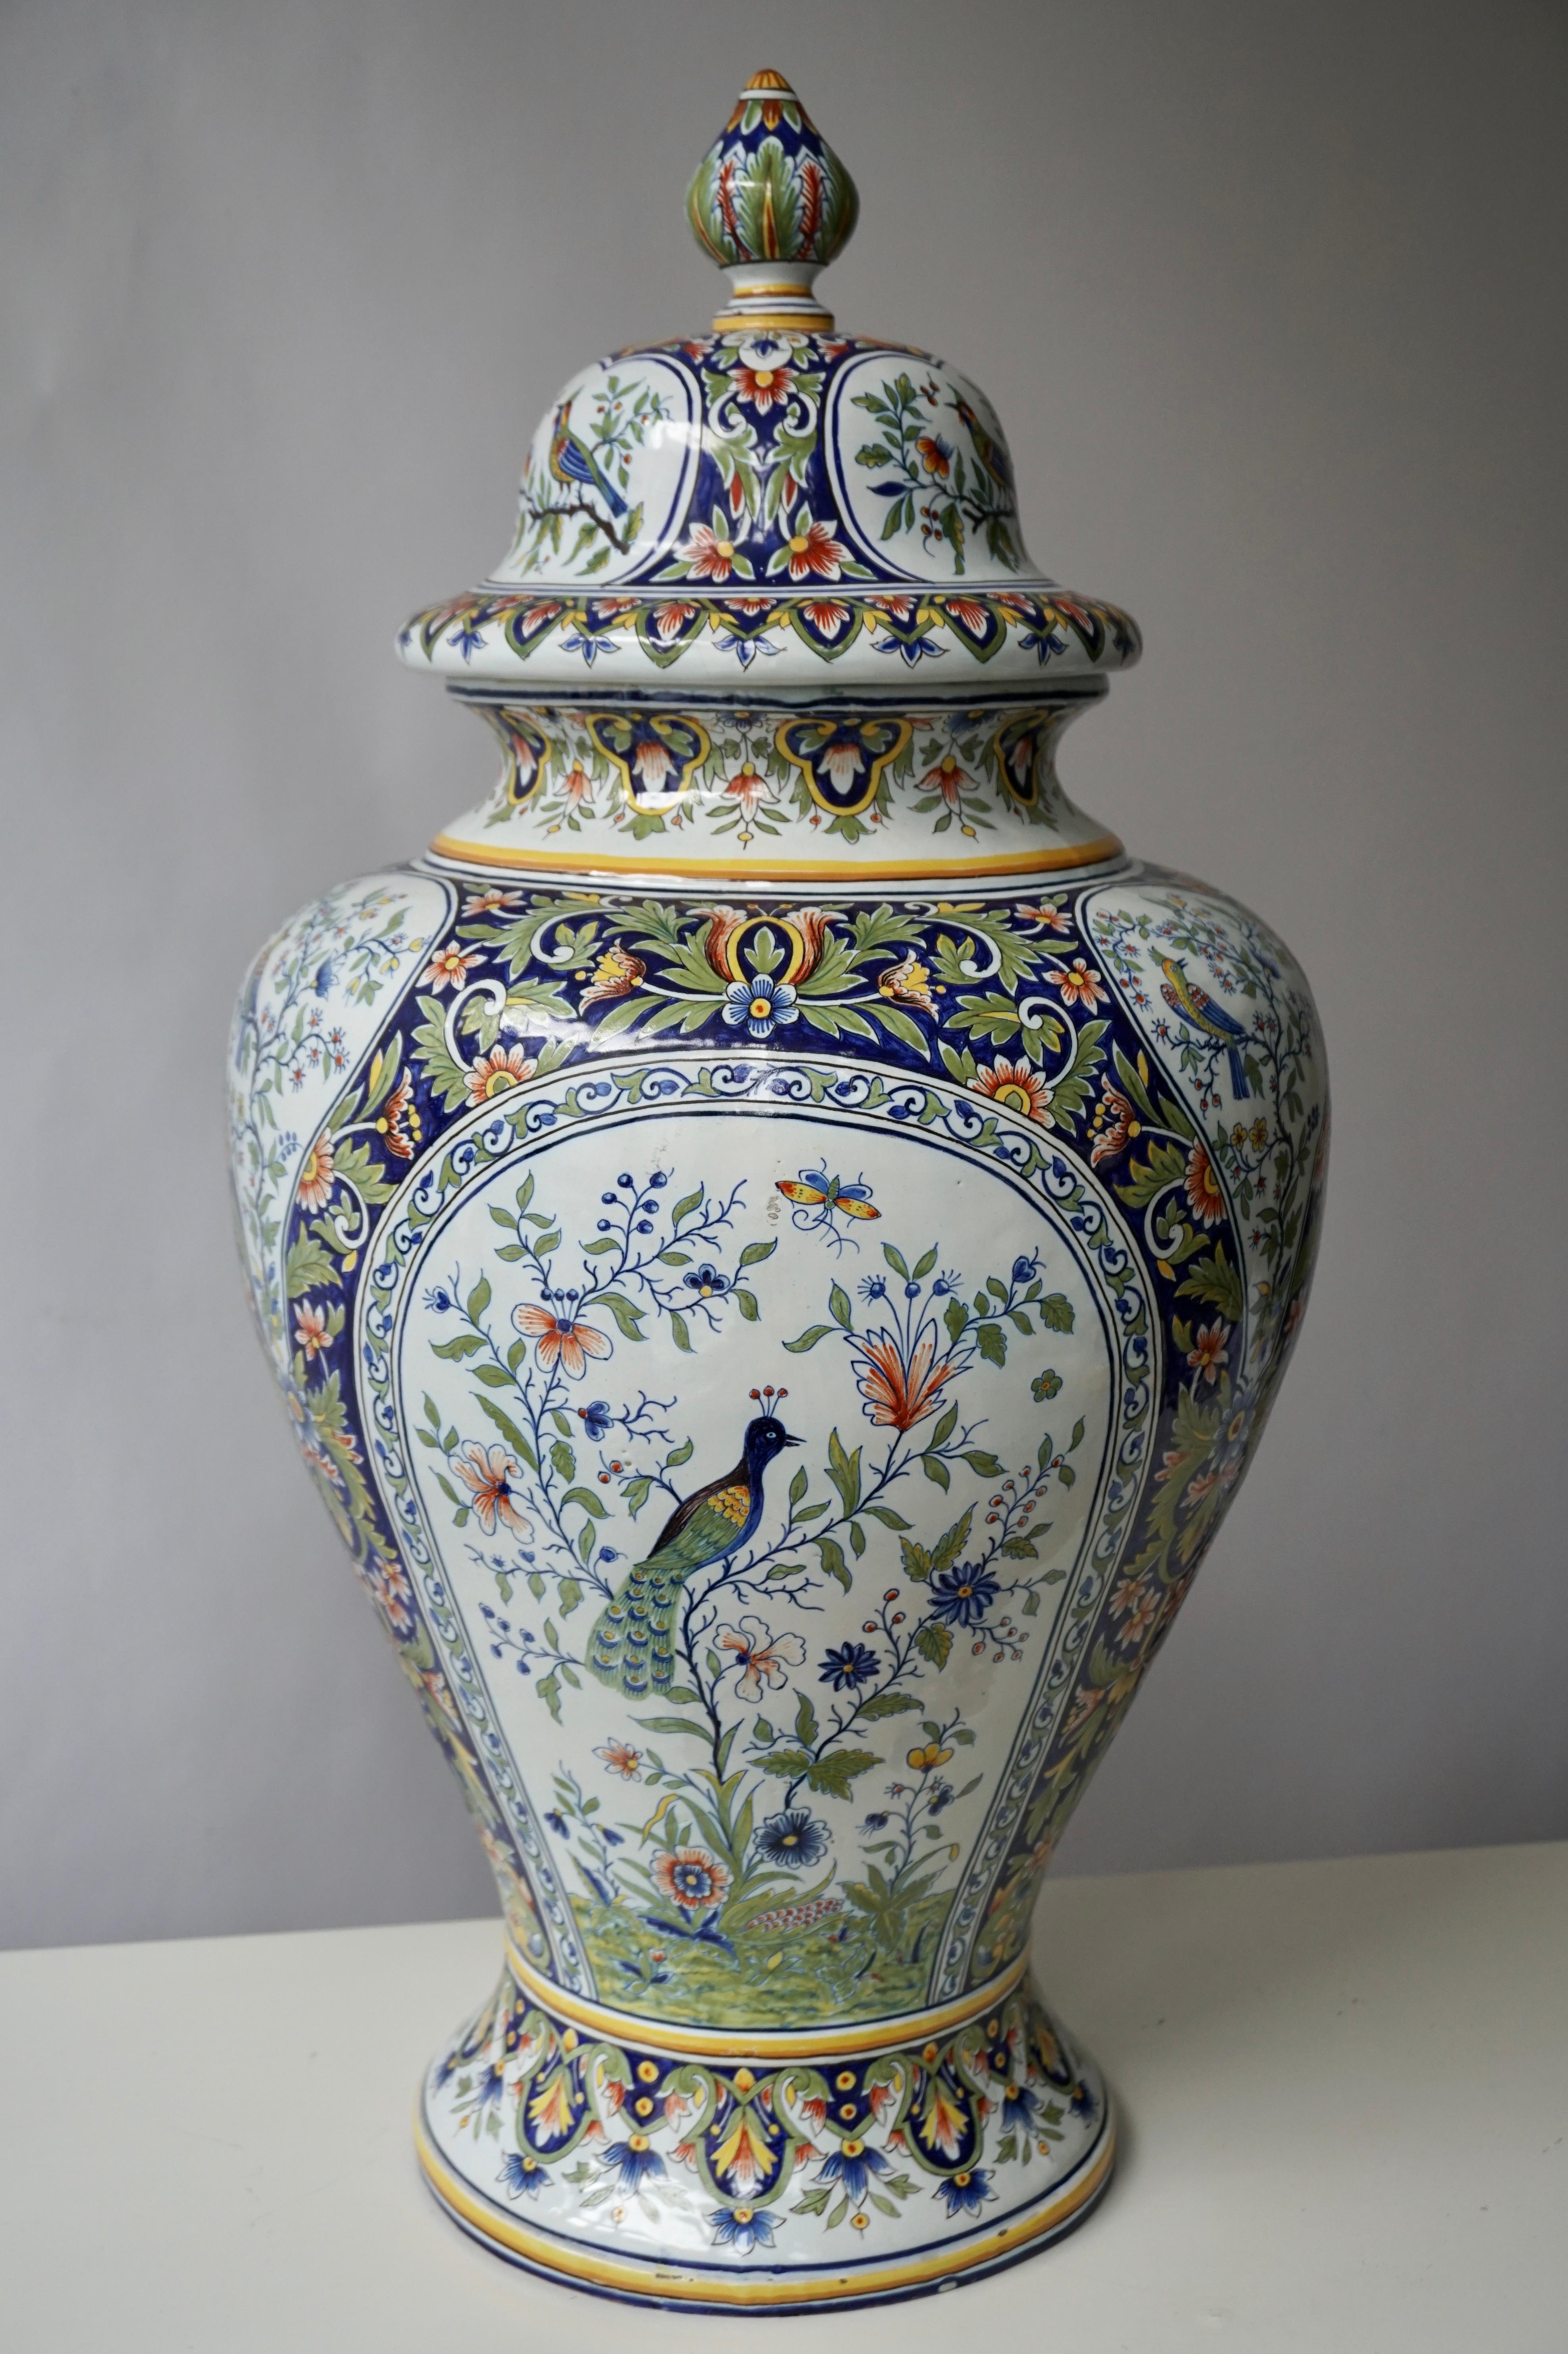 French Hand Painted Faience Urn or Vase with Flowers and Birds Motifs 2